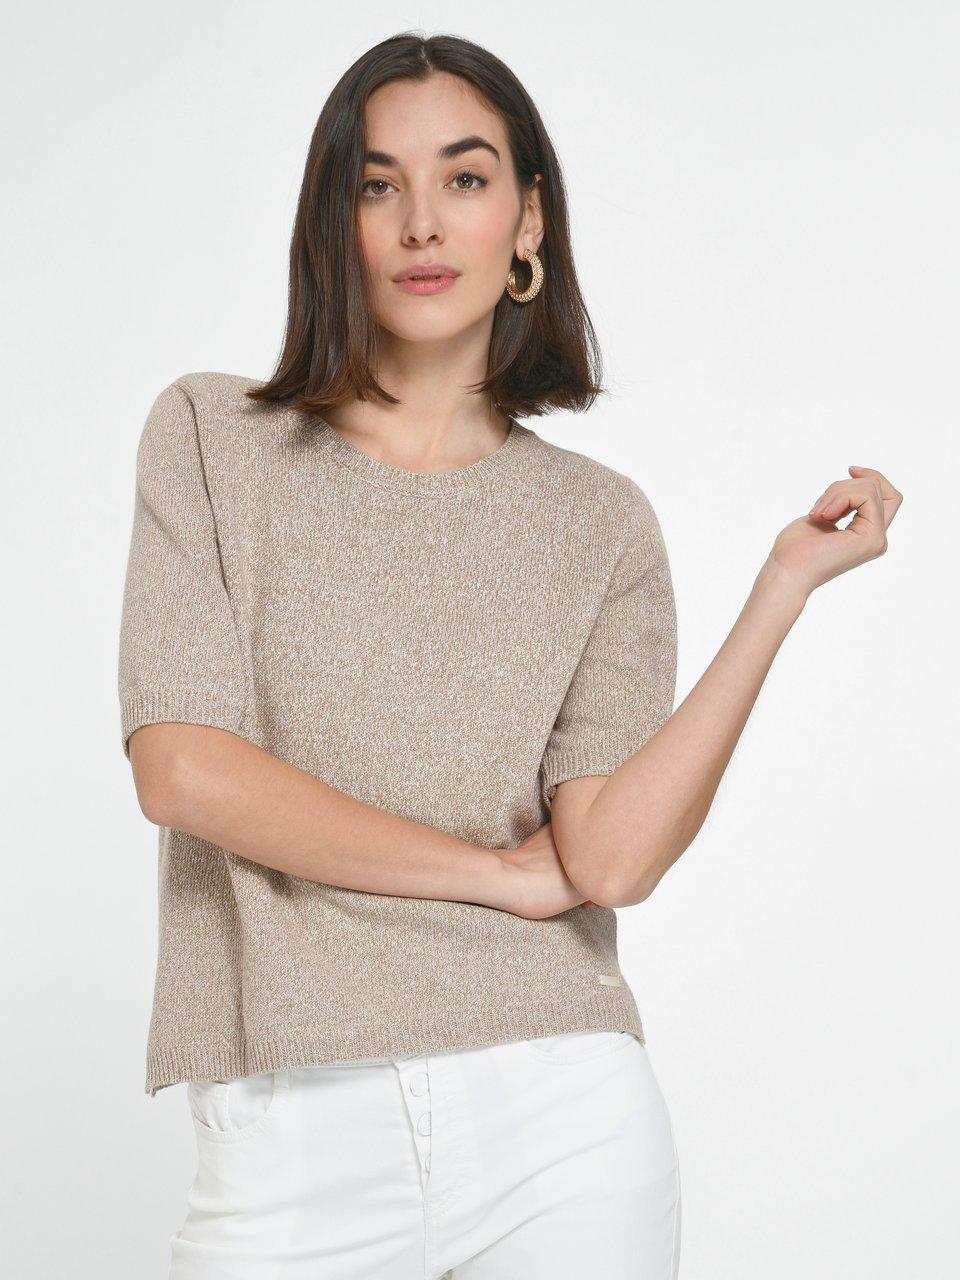 PETER HAHN PURE EDITION - Le pull manches courtes